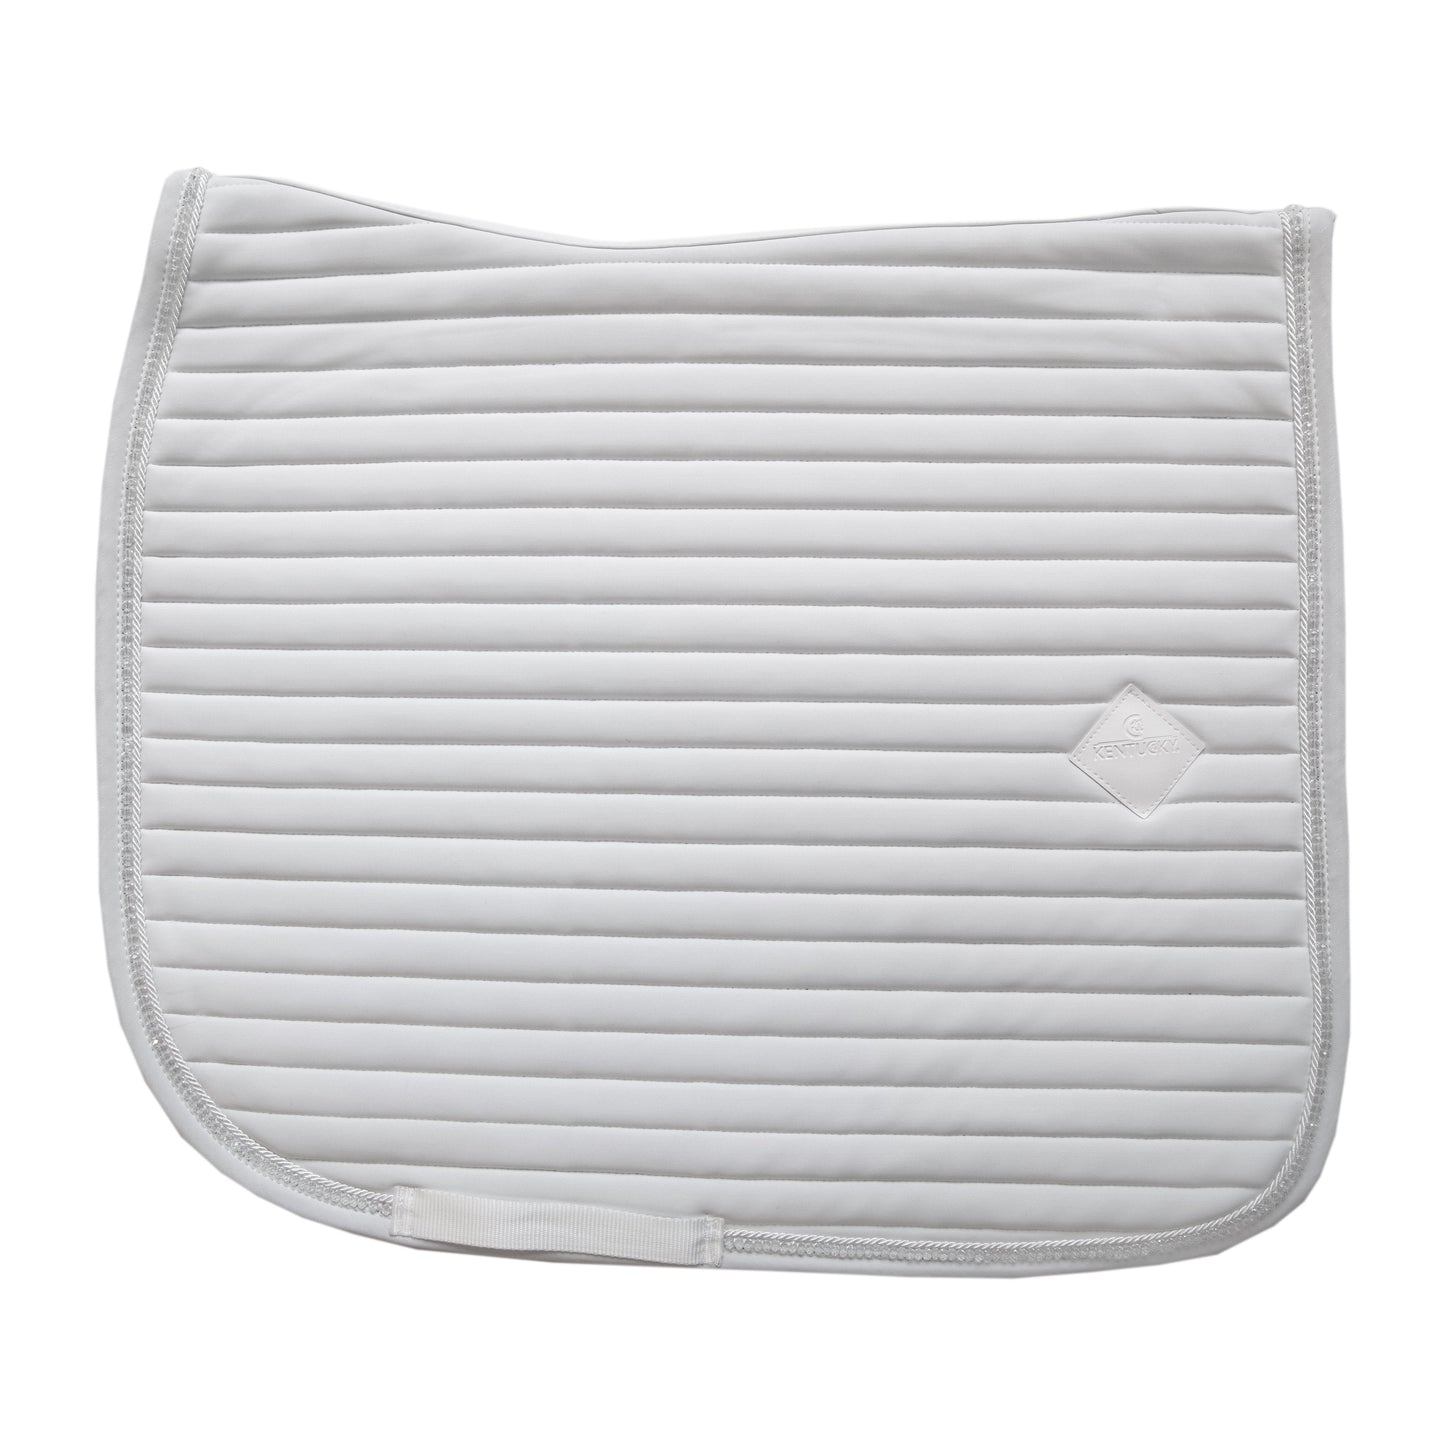 Kentucky Saddle Pad Pearls Dressage-Trailrace Equestrian Outfitters-The Equestrian